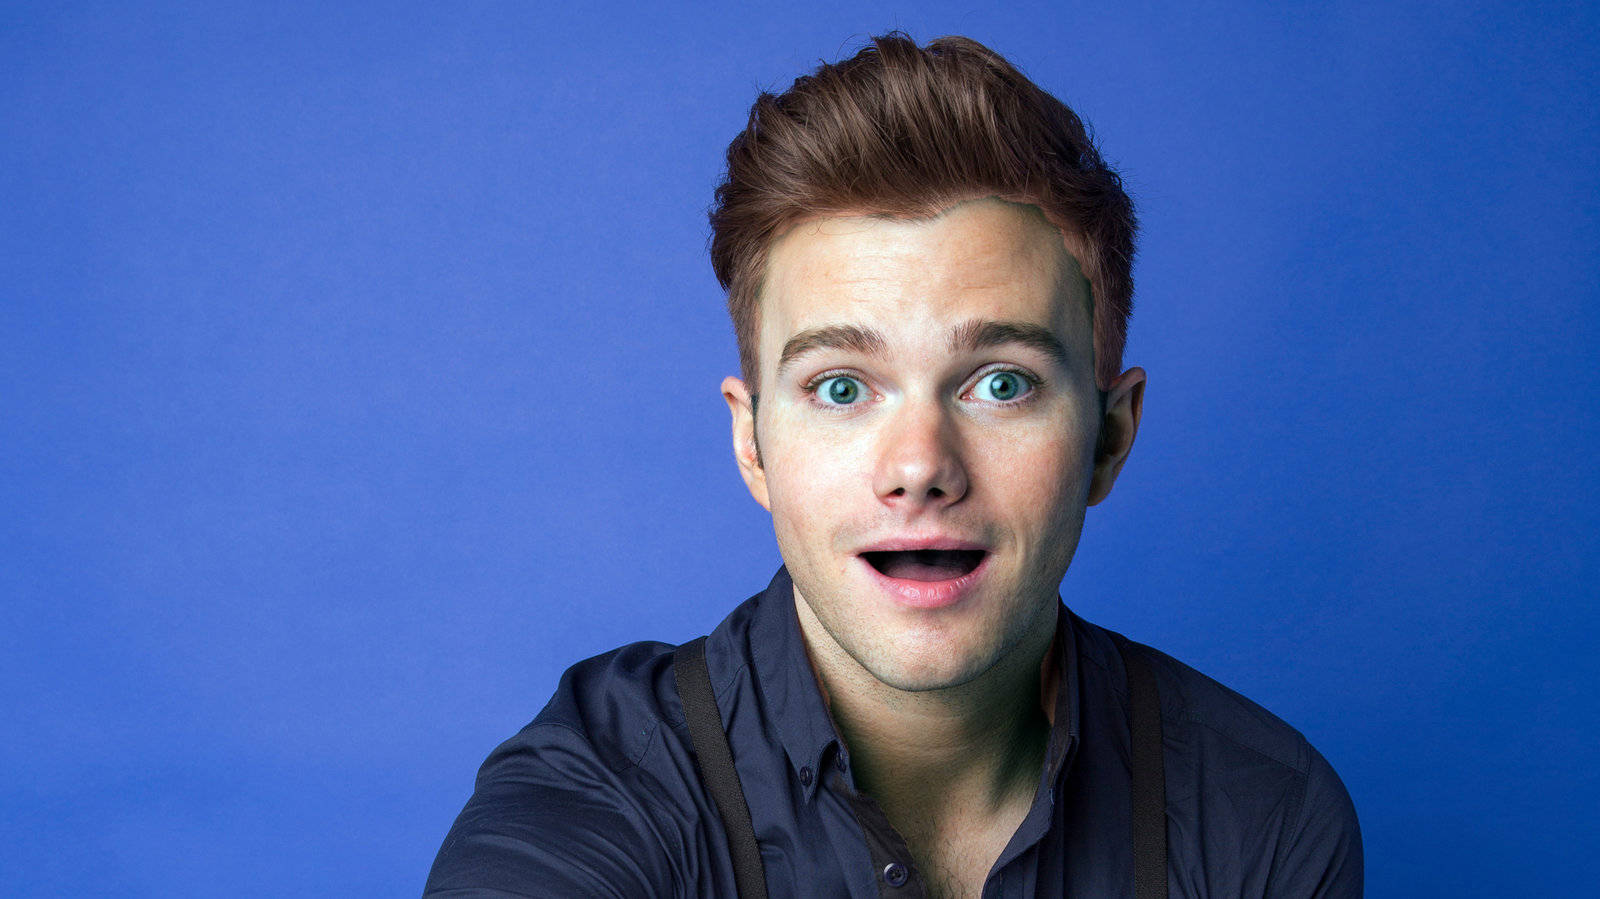 Quirky Chris Colfer Background